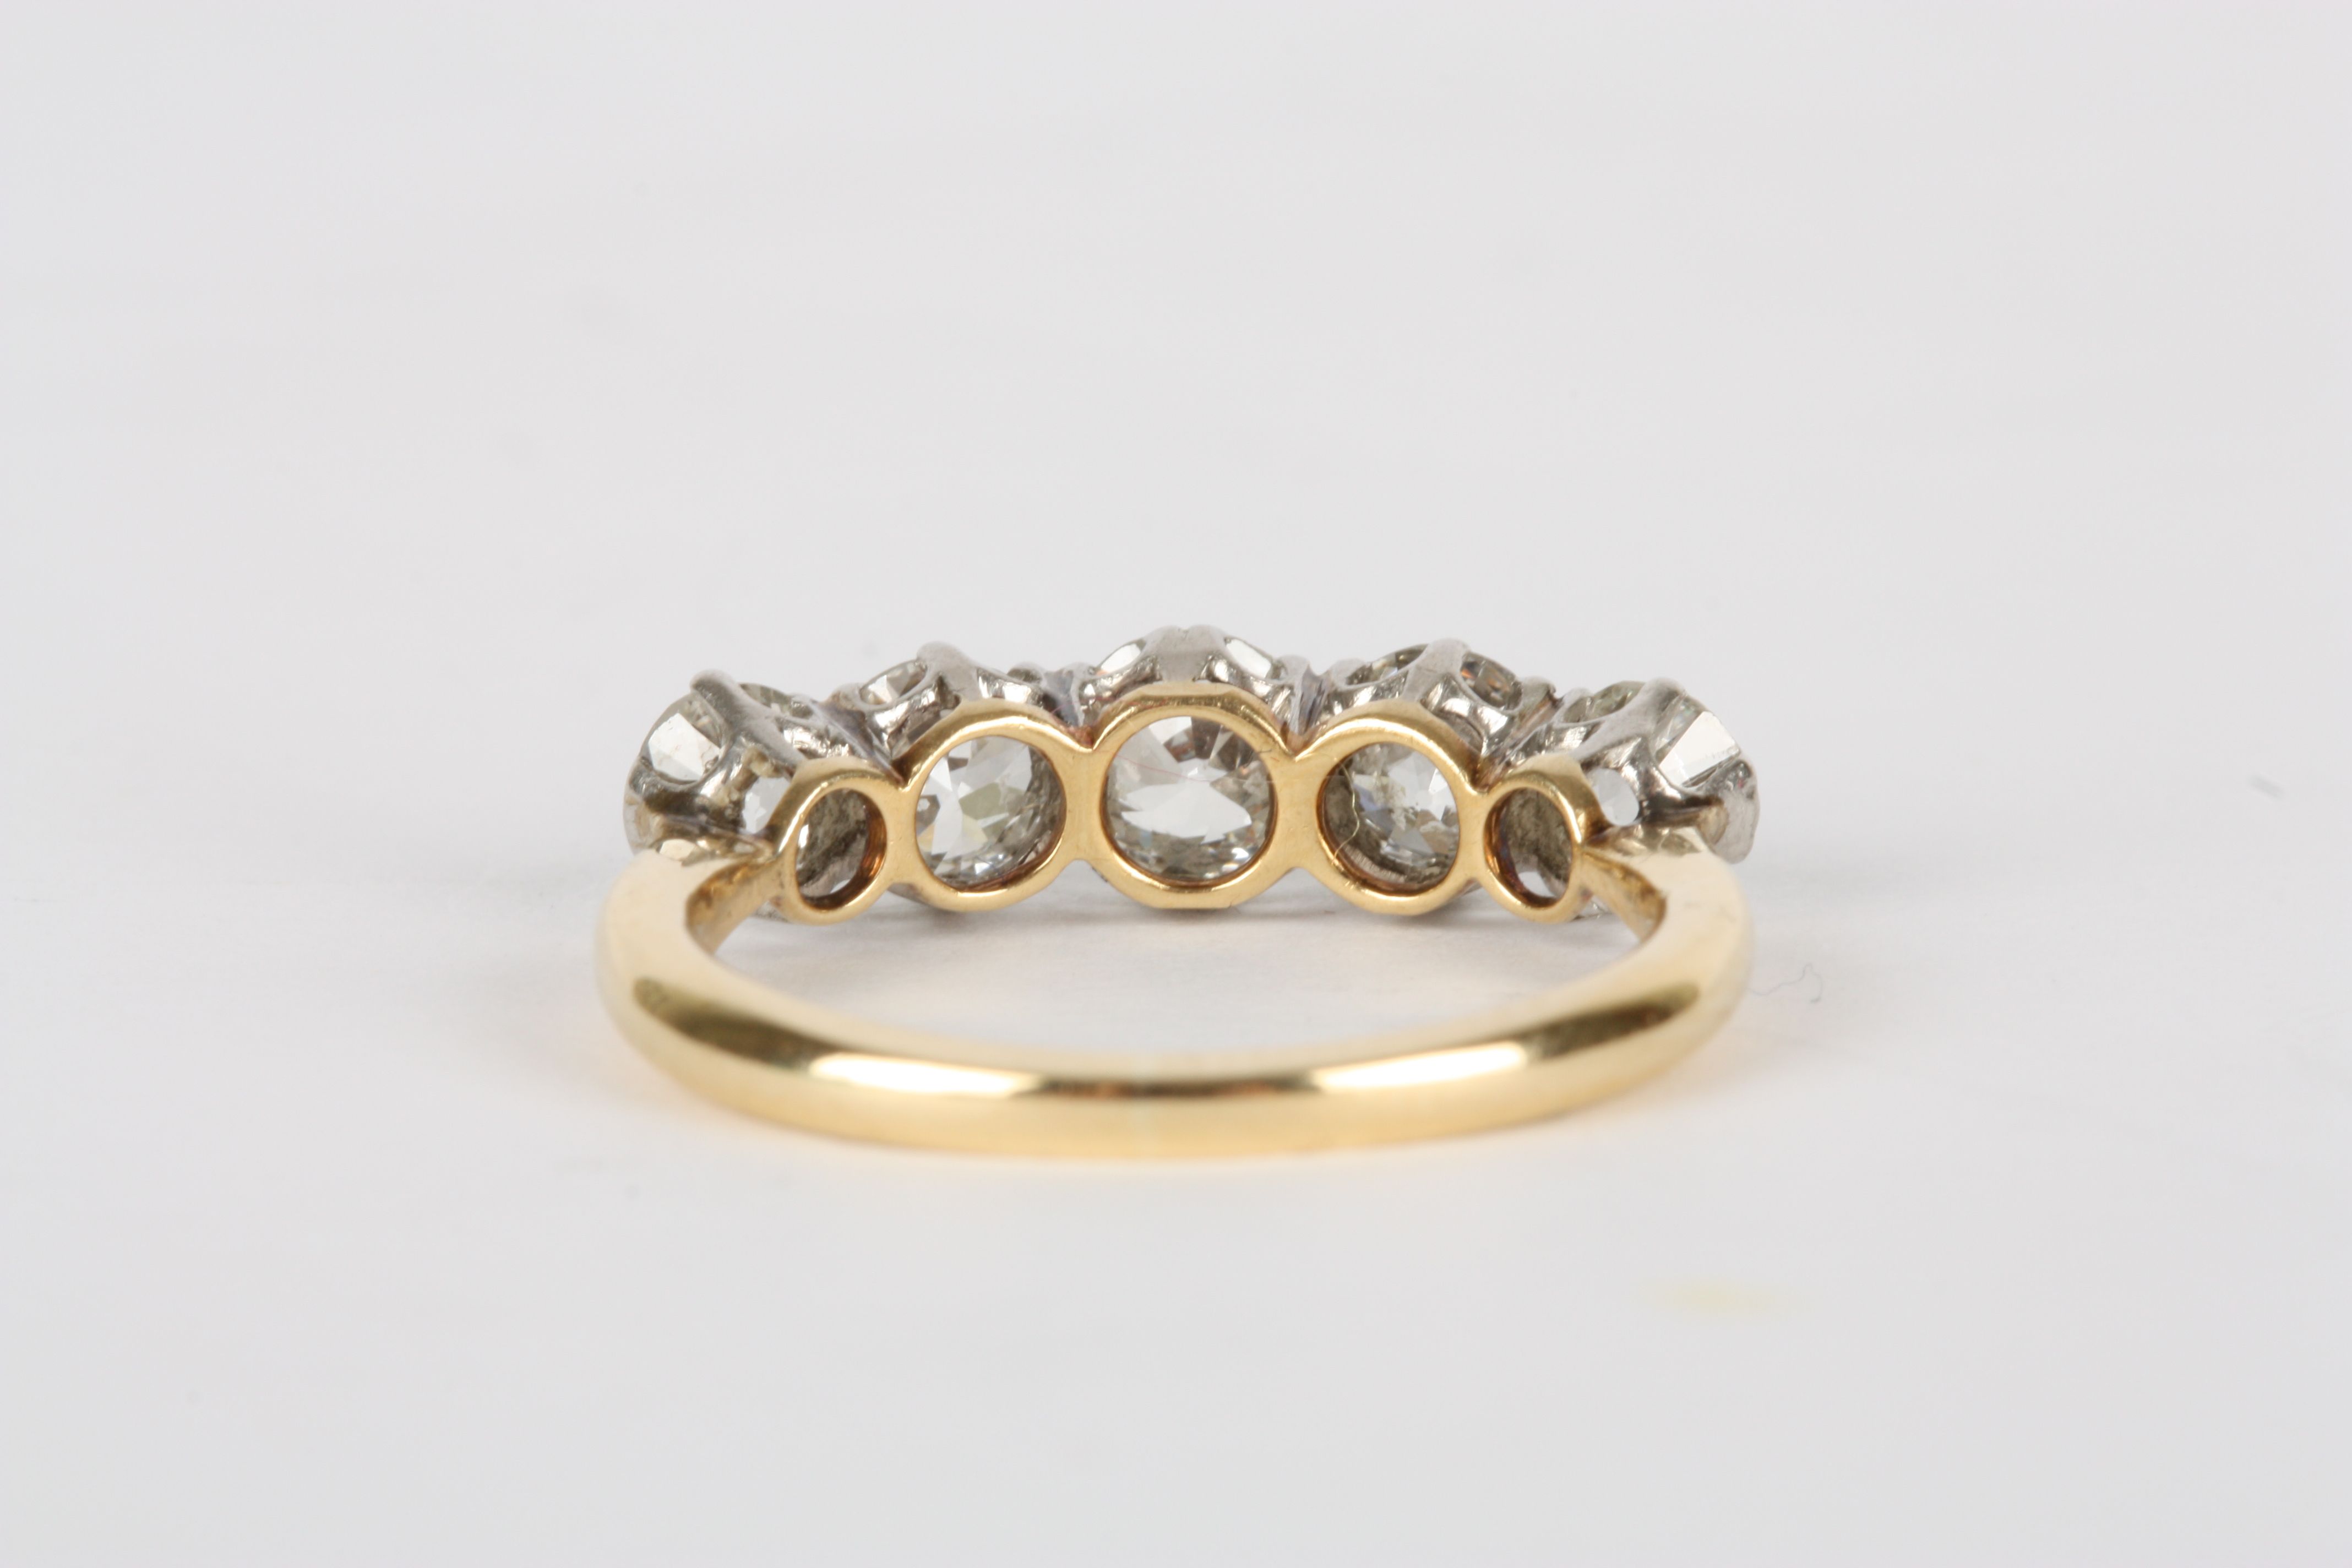 A five stone diamond ring set in 18ct yellow gold and platinum, the central stone of approximately - Image 2 of 2